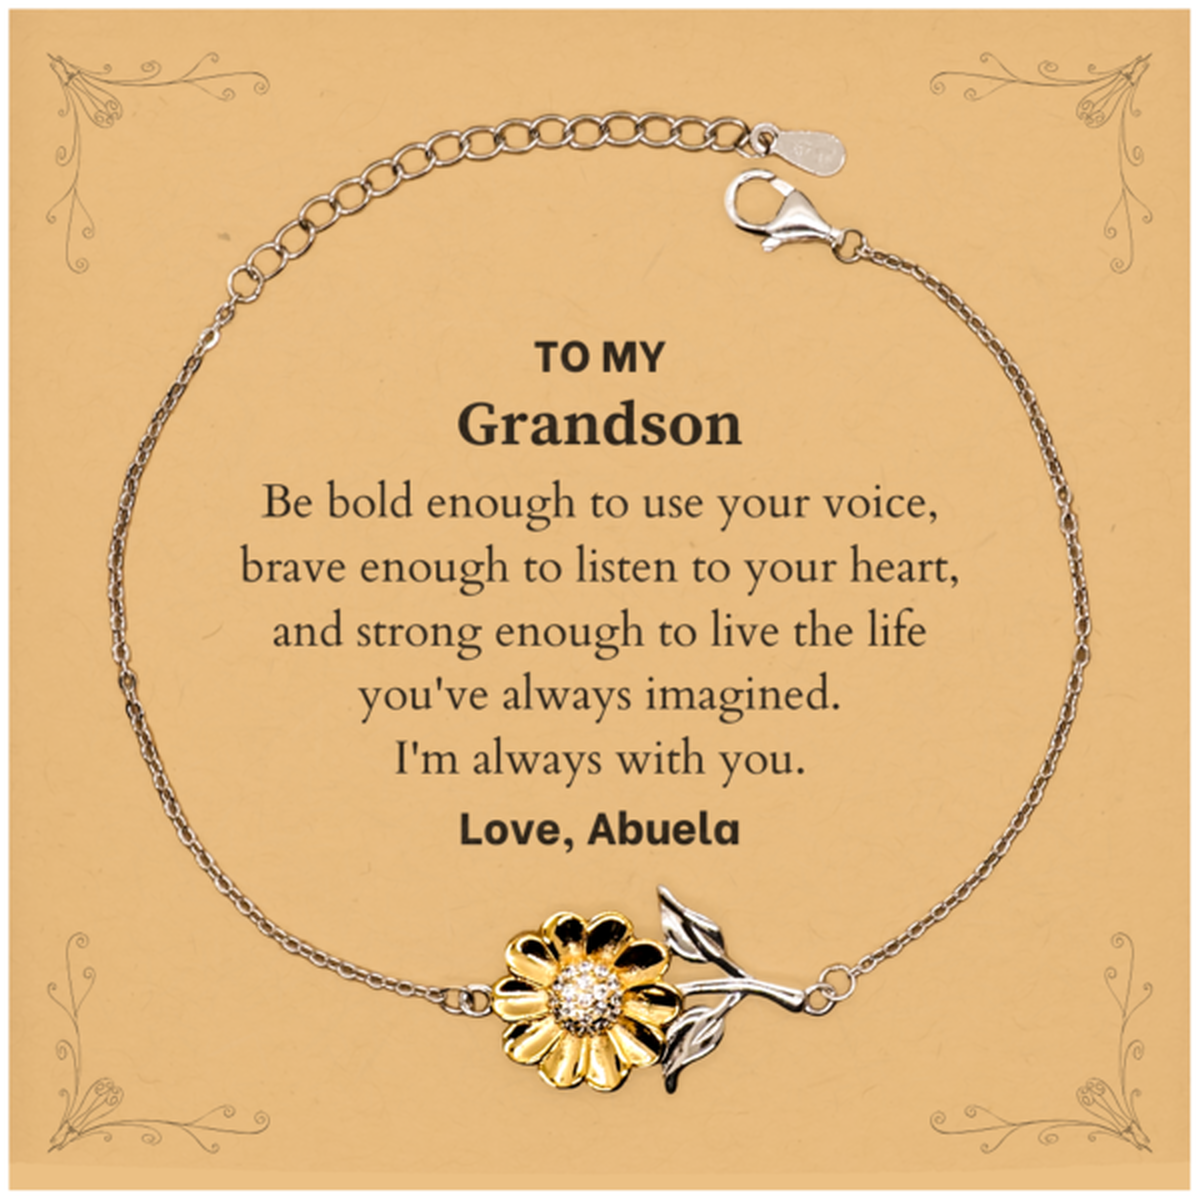 Keepsake Grandson Sunflower Bracelet Gift Idea Graduation Christmas Birthday Grandson from Abuela, Grandson Be bold enough to use your voice, brave enough to listen to your heart. Love, Abuela